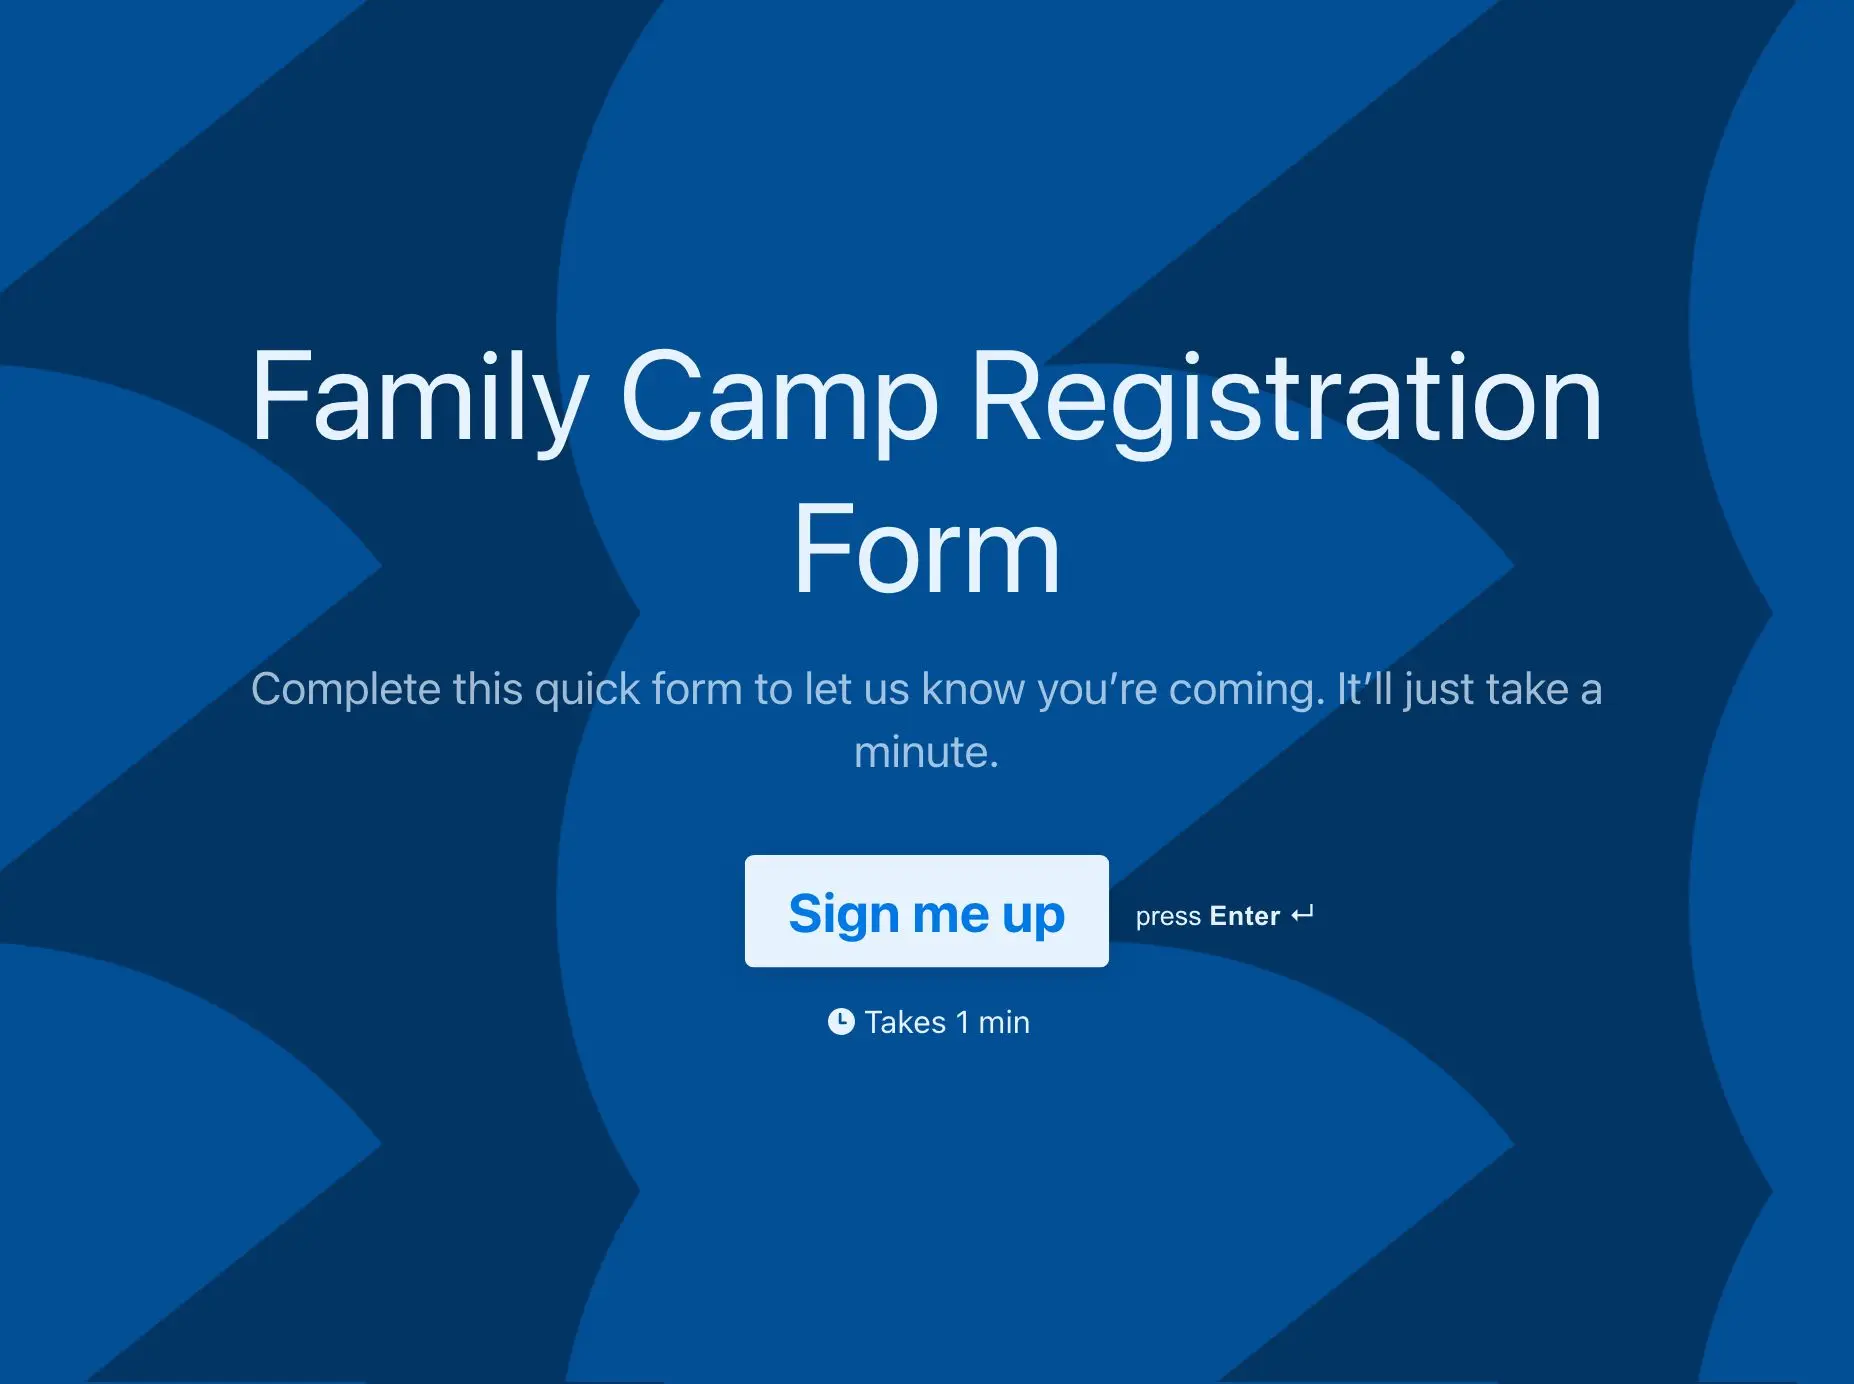 Family Camp Registration Form Template Hero